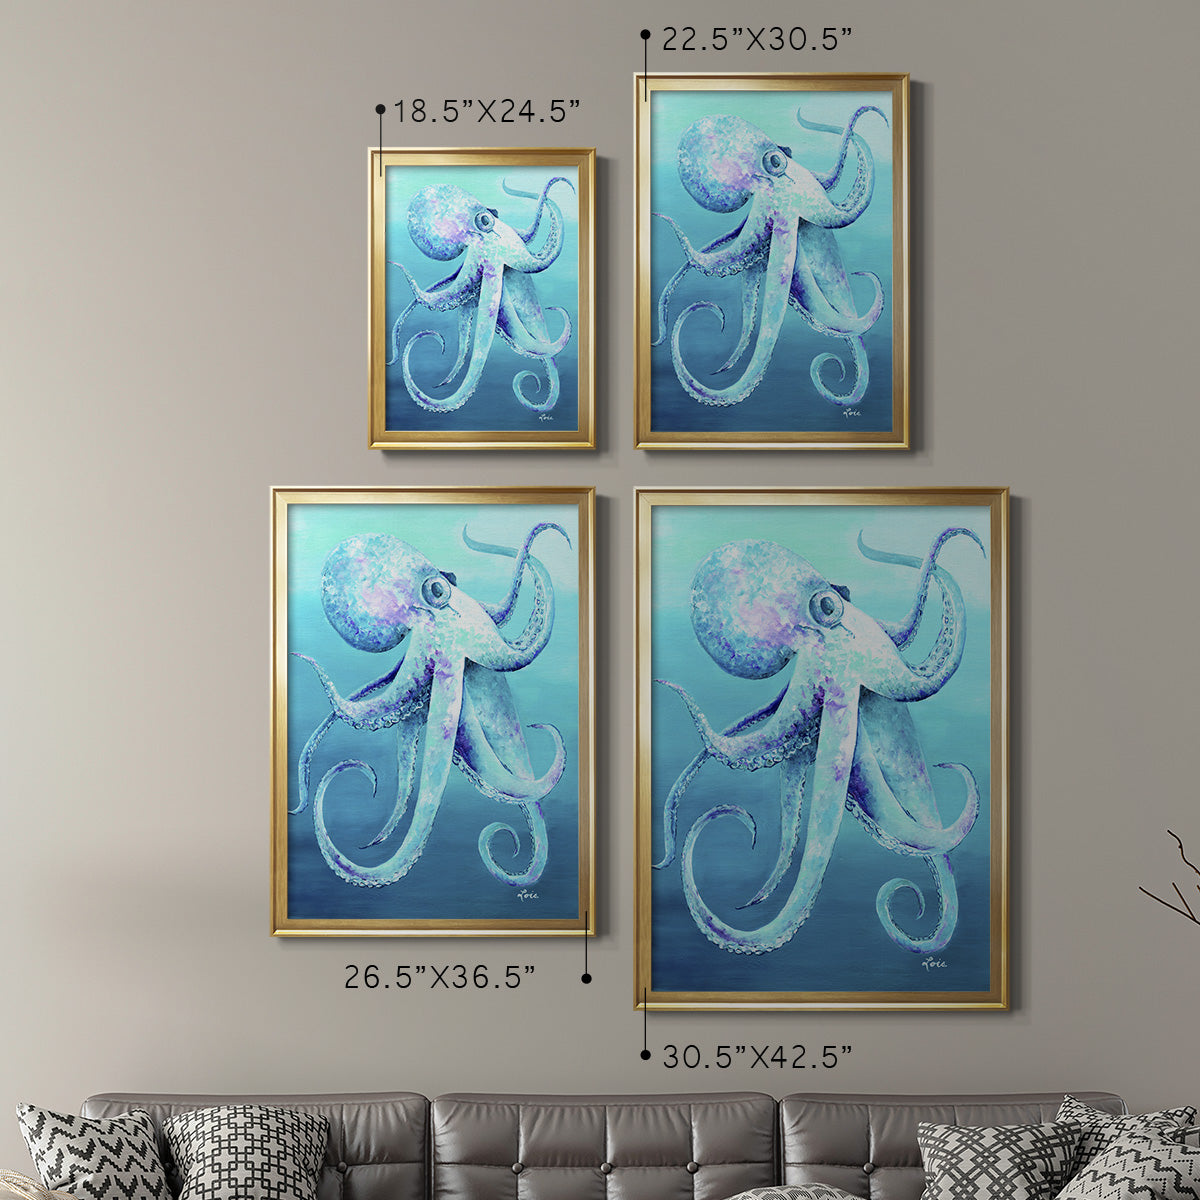 Octopus Premium Framed Print - Ready to Hang